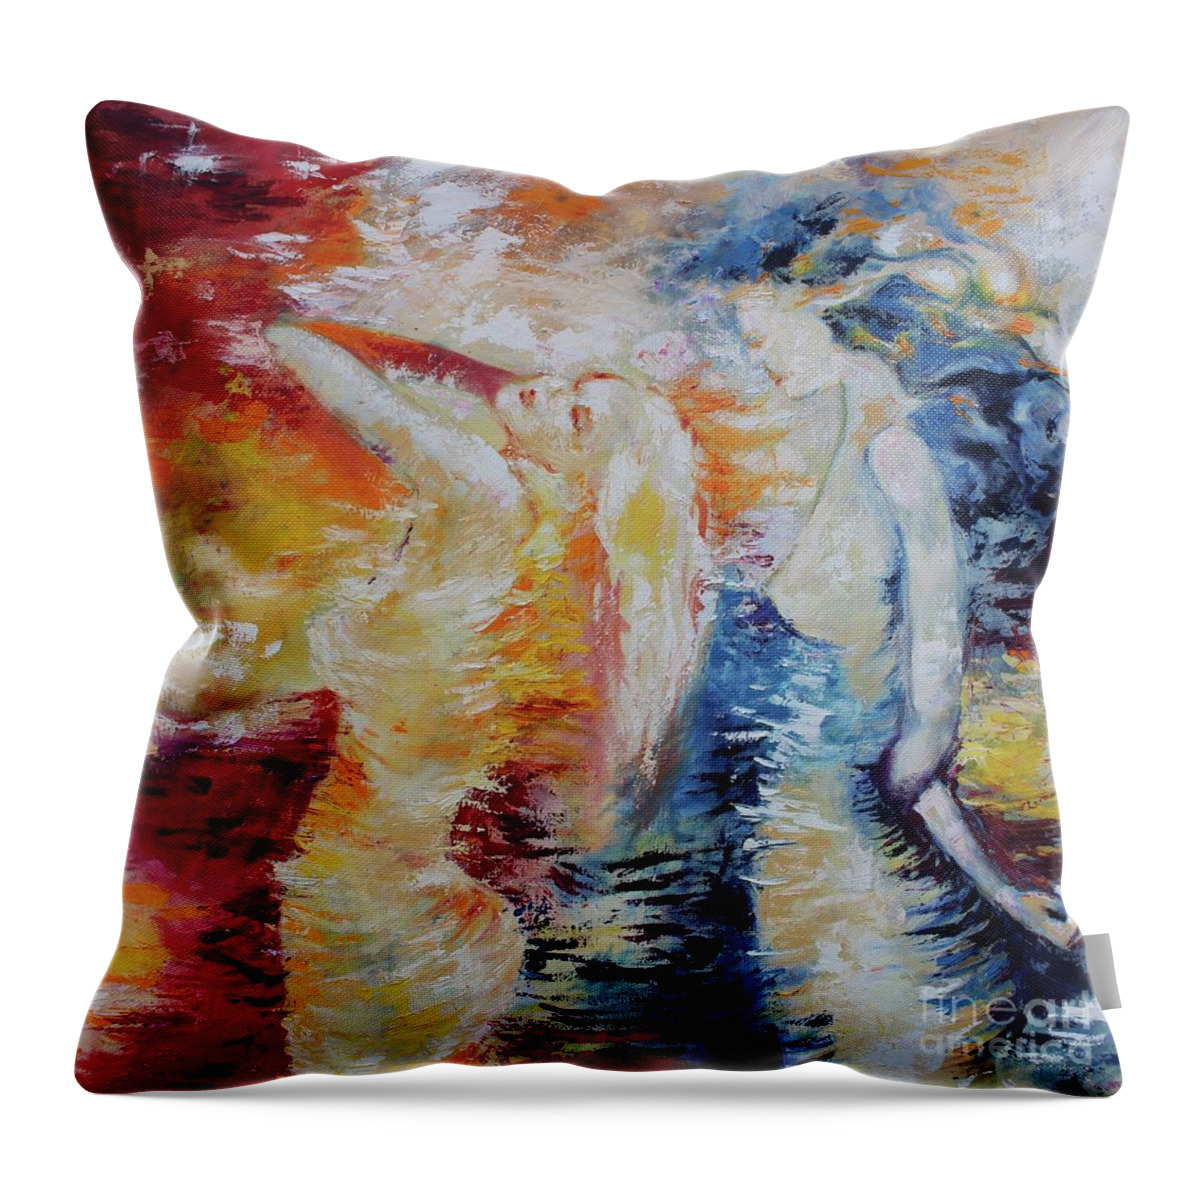 Northernlights Throw Pillow featuring the painting Sisters by Marat Essex